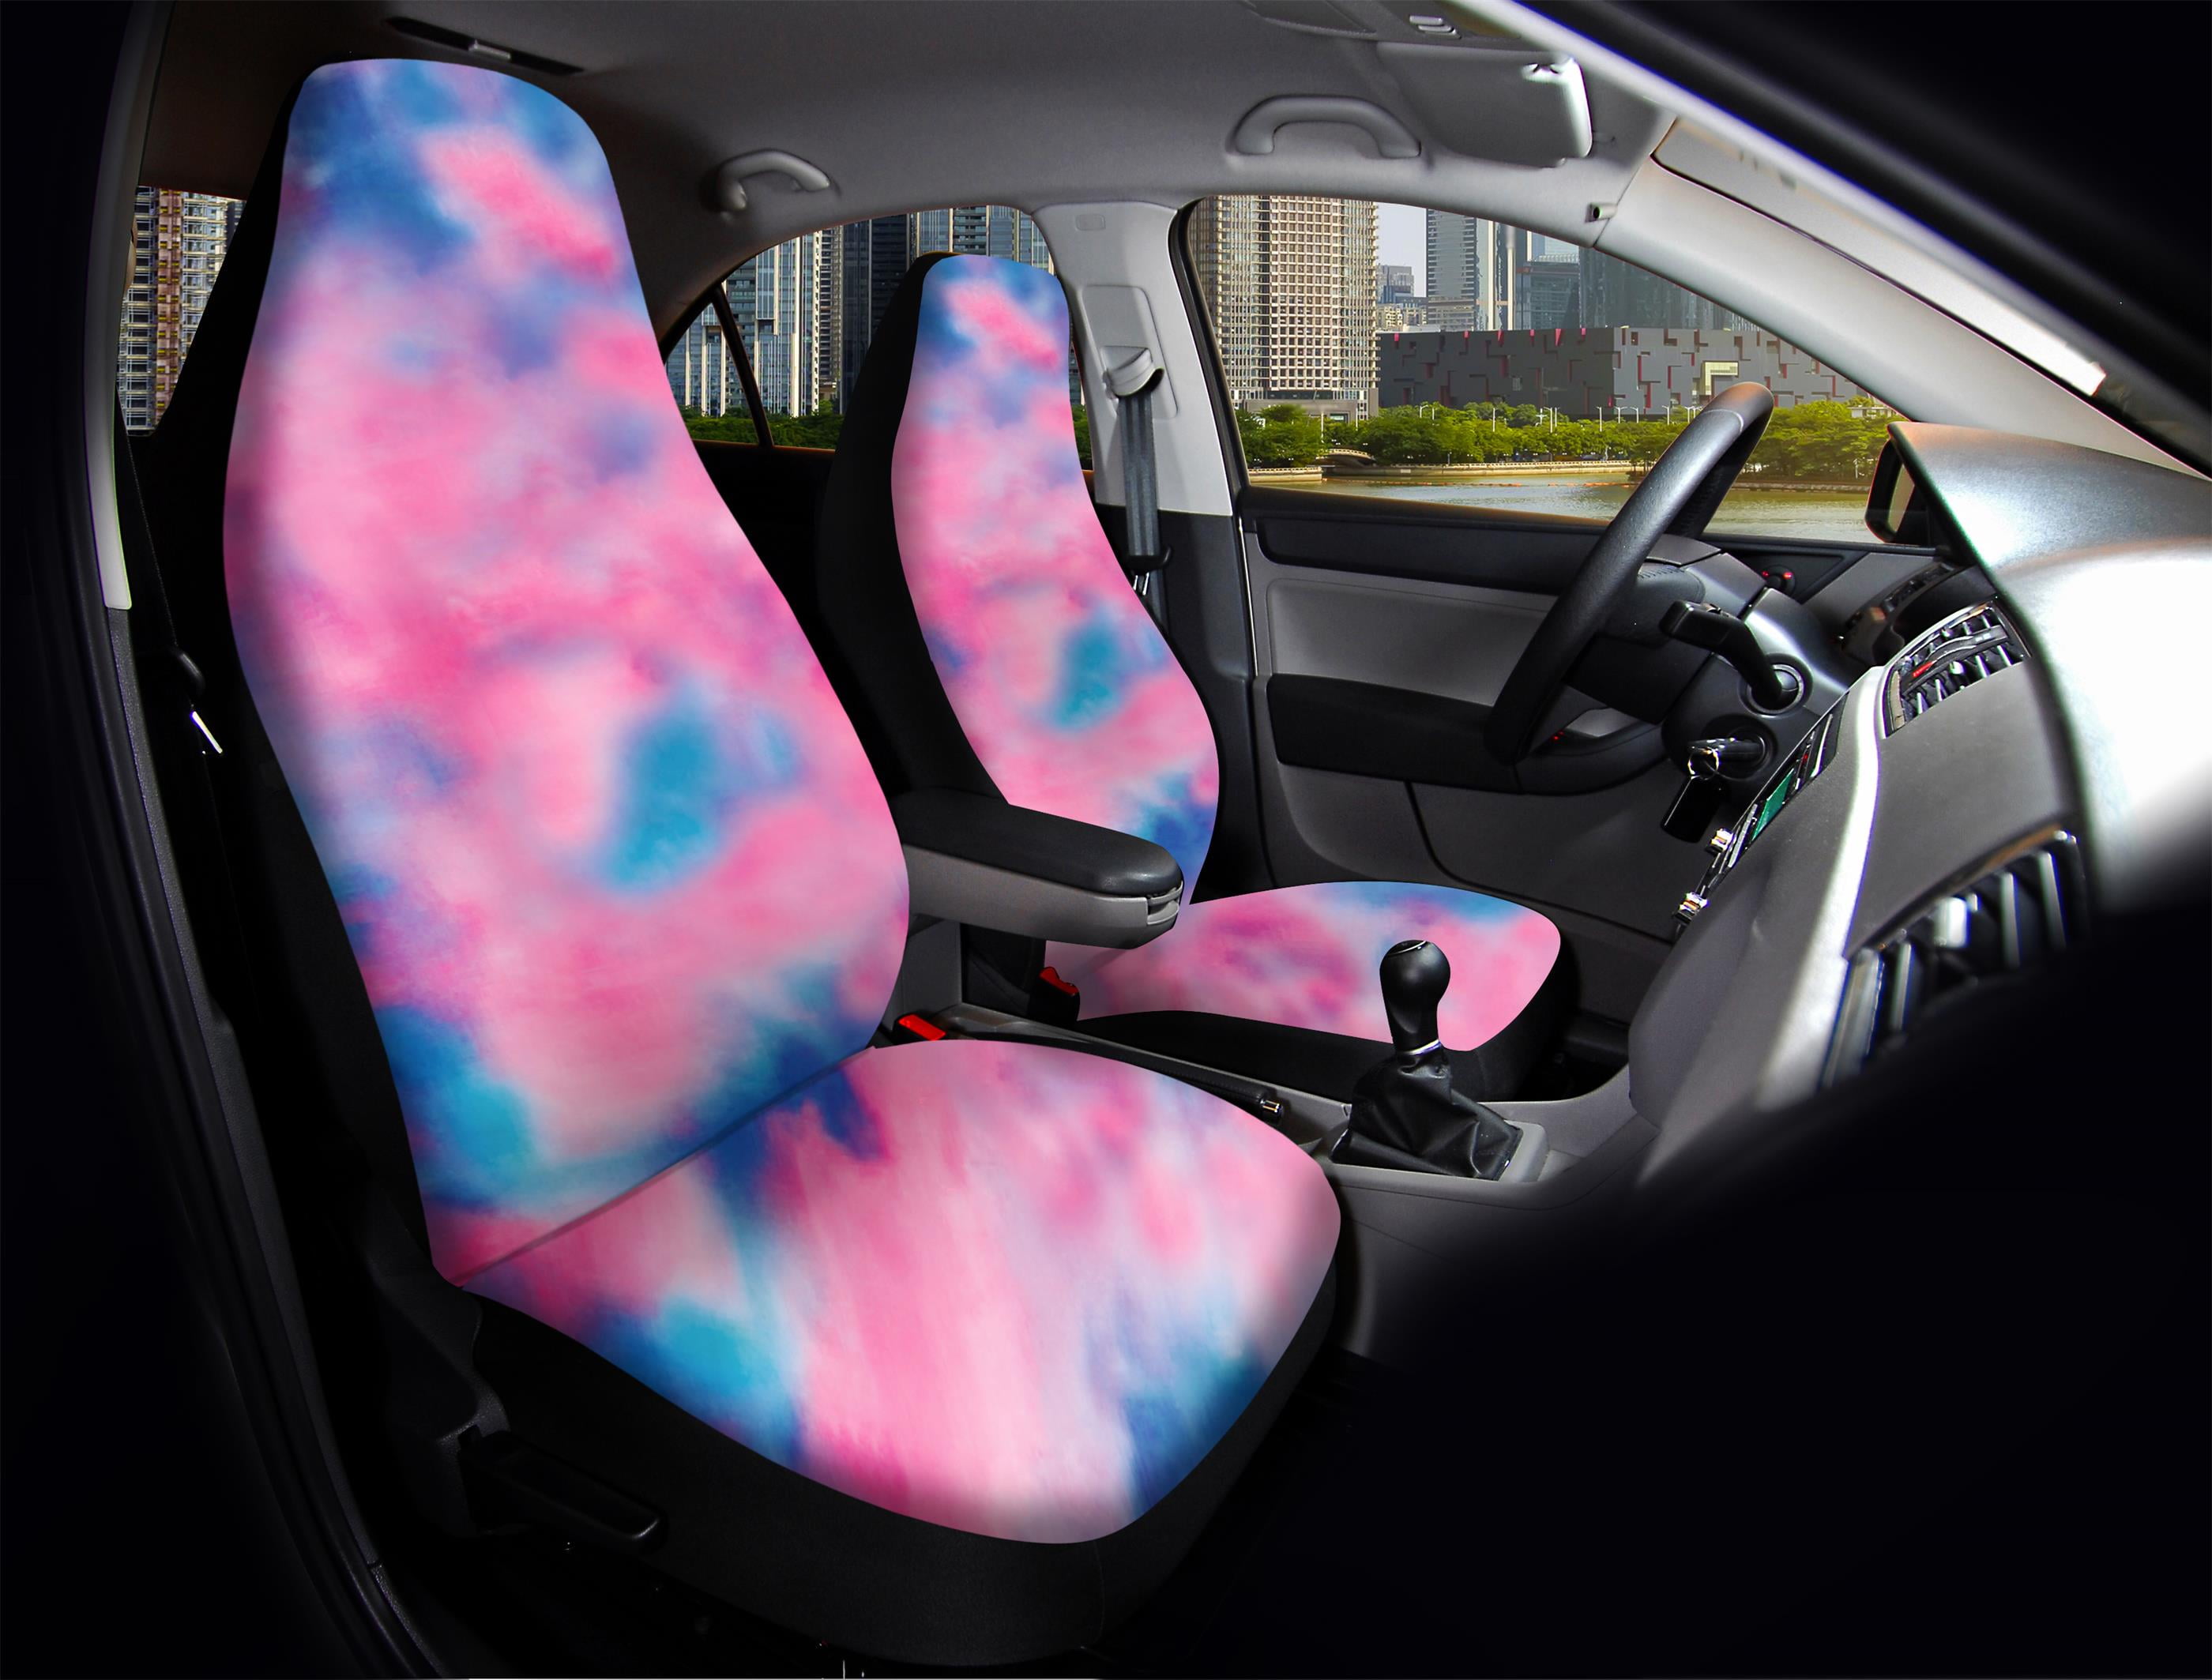 Snilety 7pcs Multicolor Tie Dye Car Seat Covers Full Set Auto Seat Protectors with Steering Wheel Cover and Seat Belt Pads Universal Fit for SUV Trucks Van 